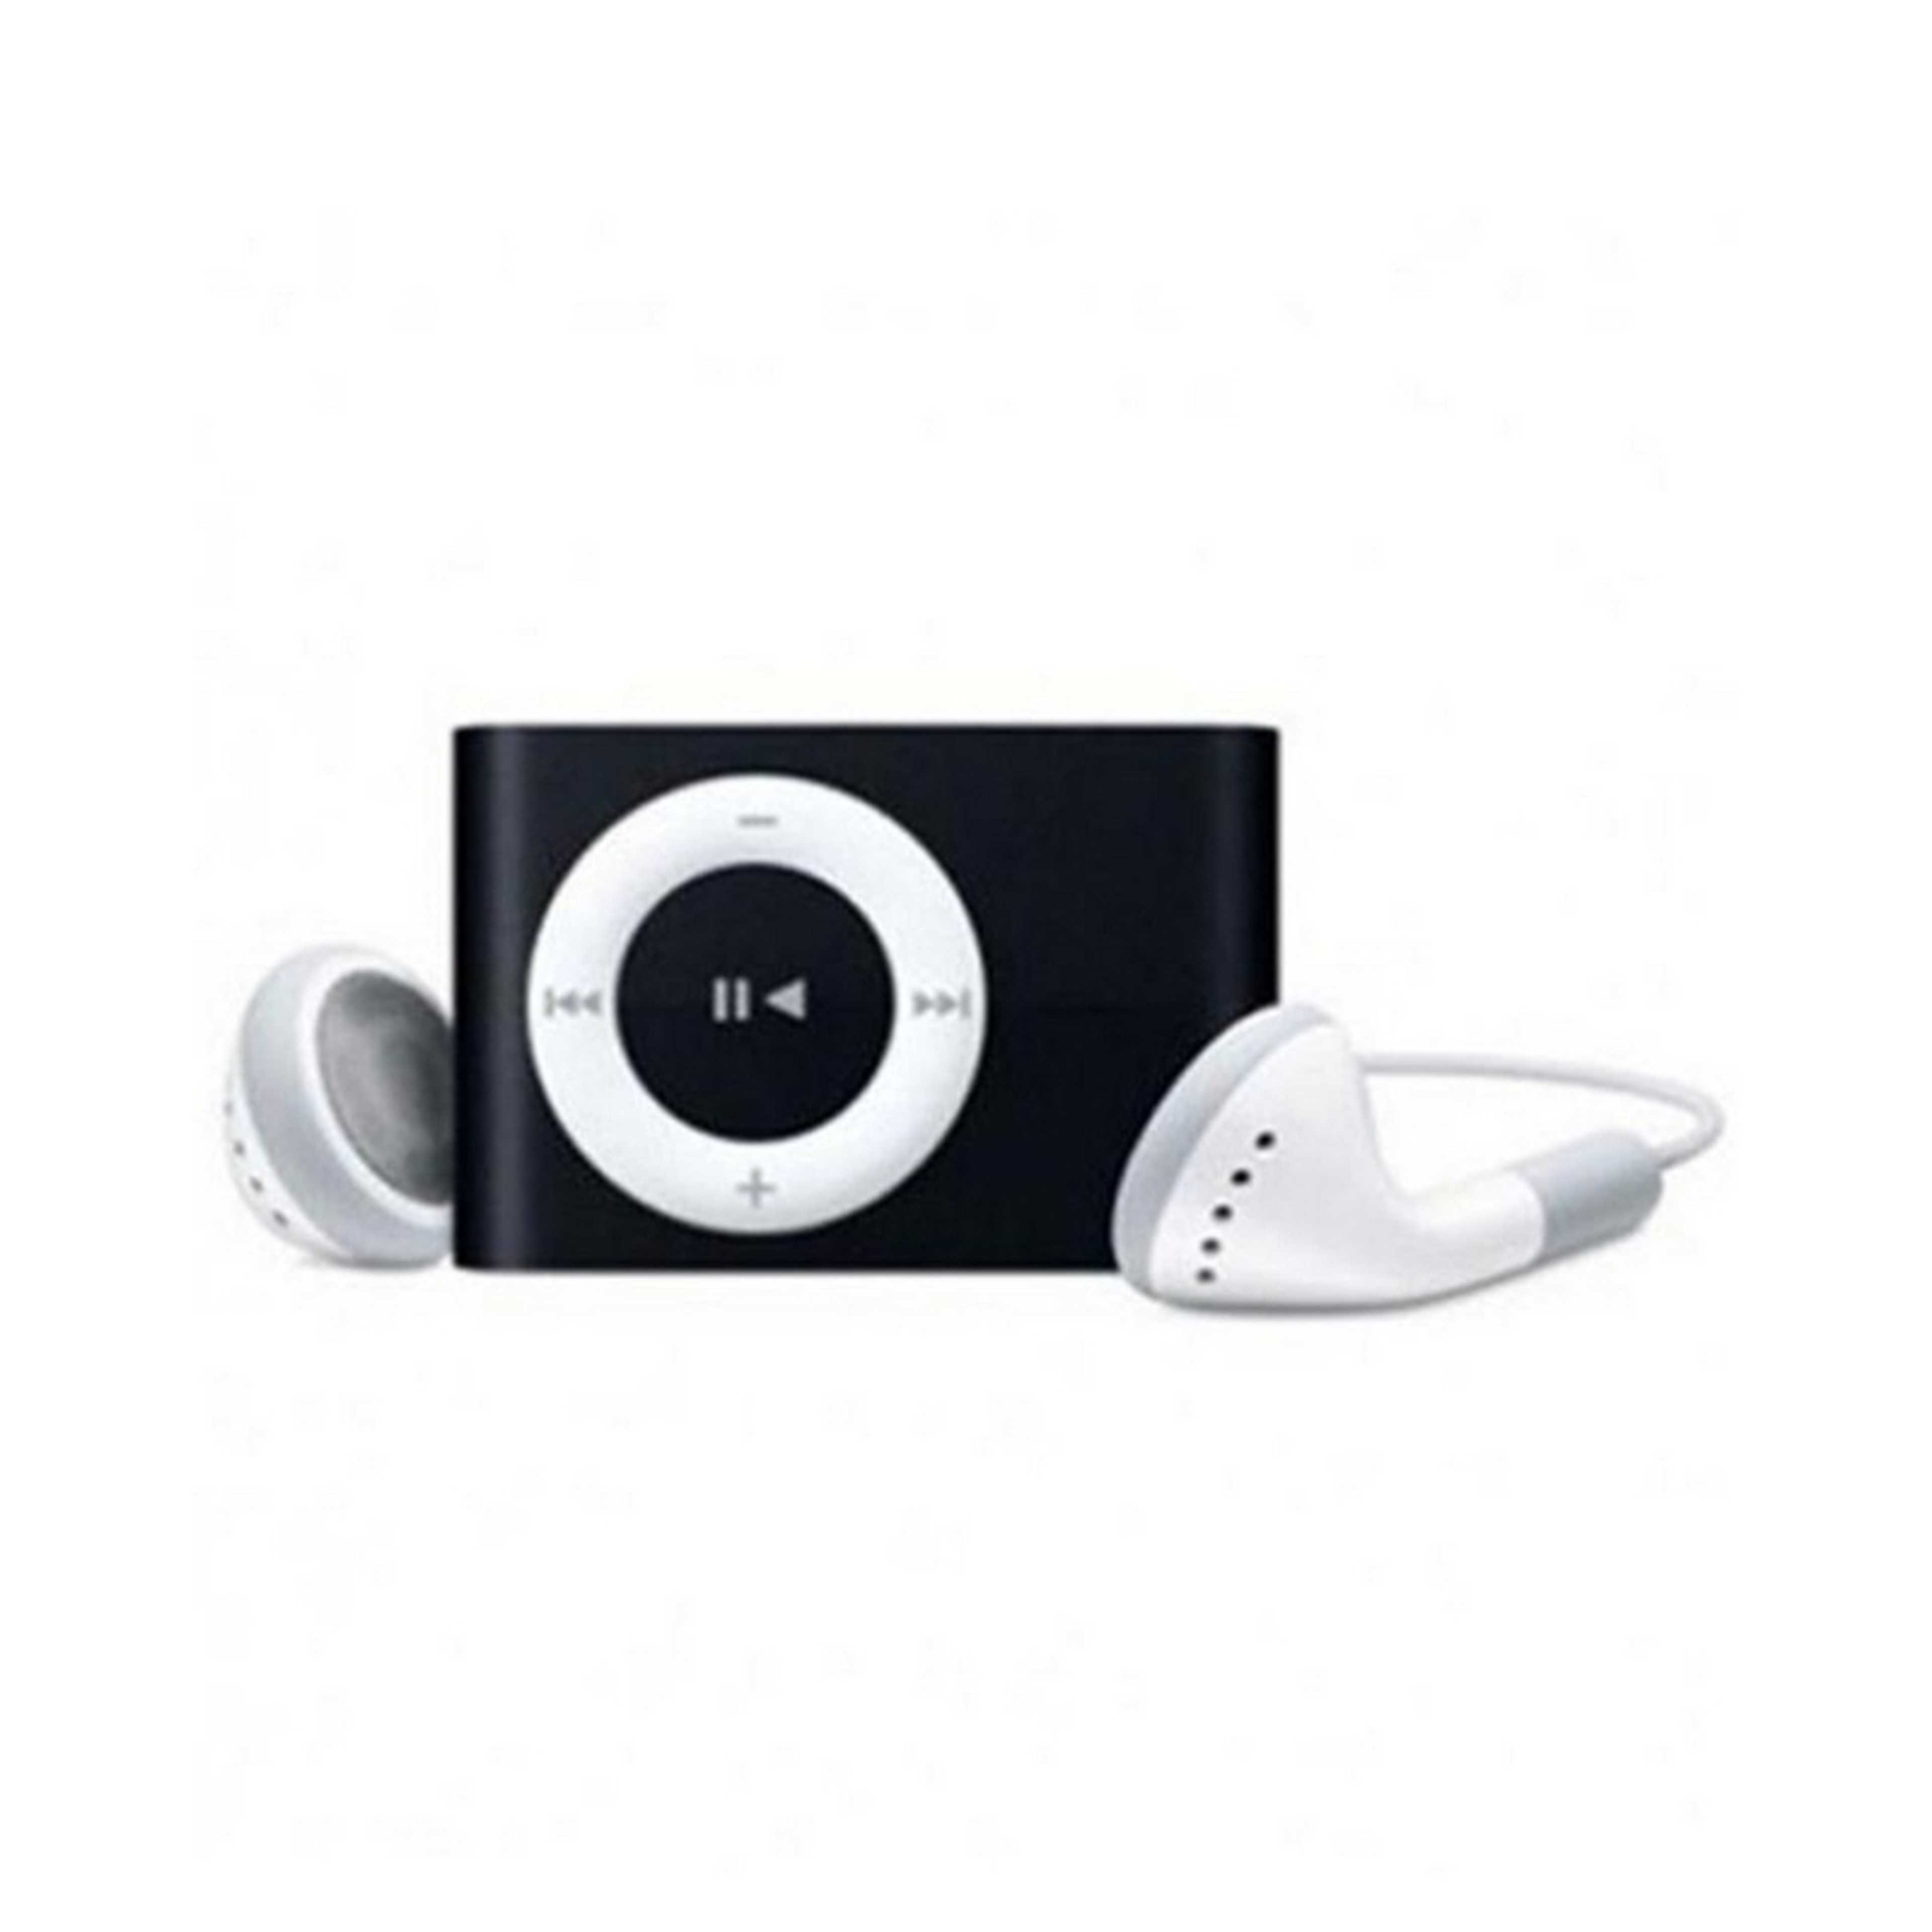 Shuffle MP3 Player with 2GB Memory Card